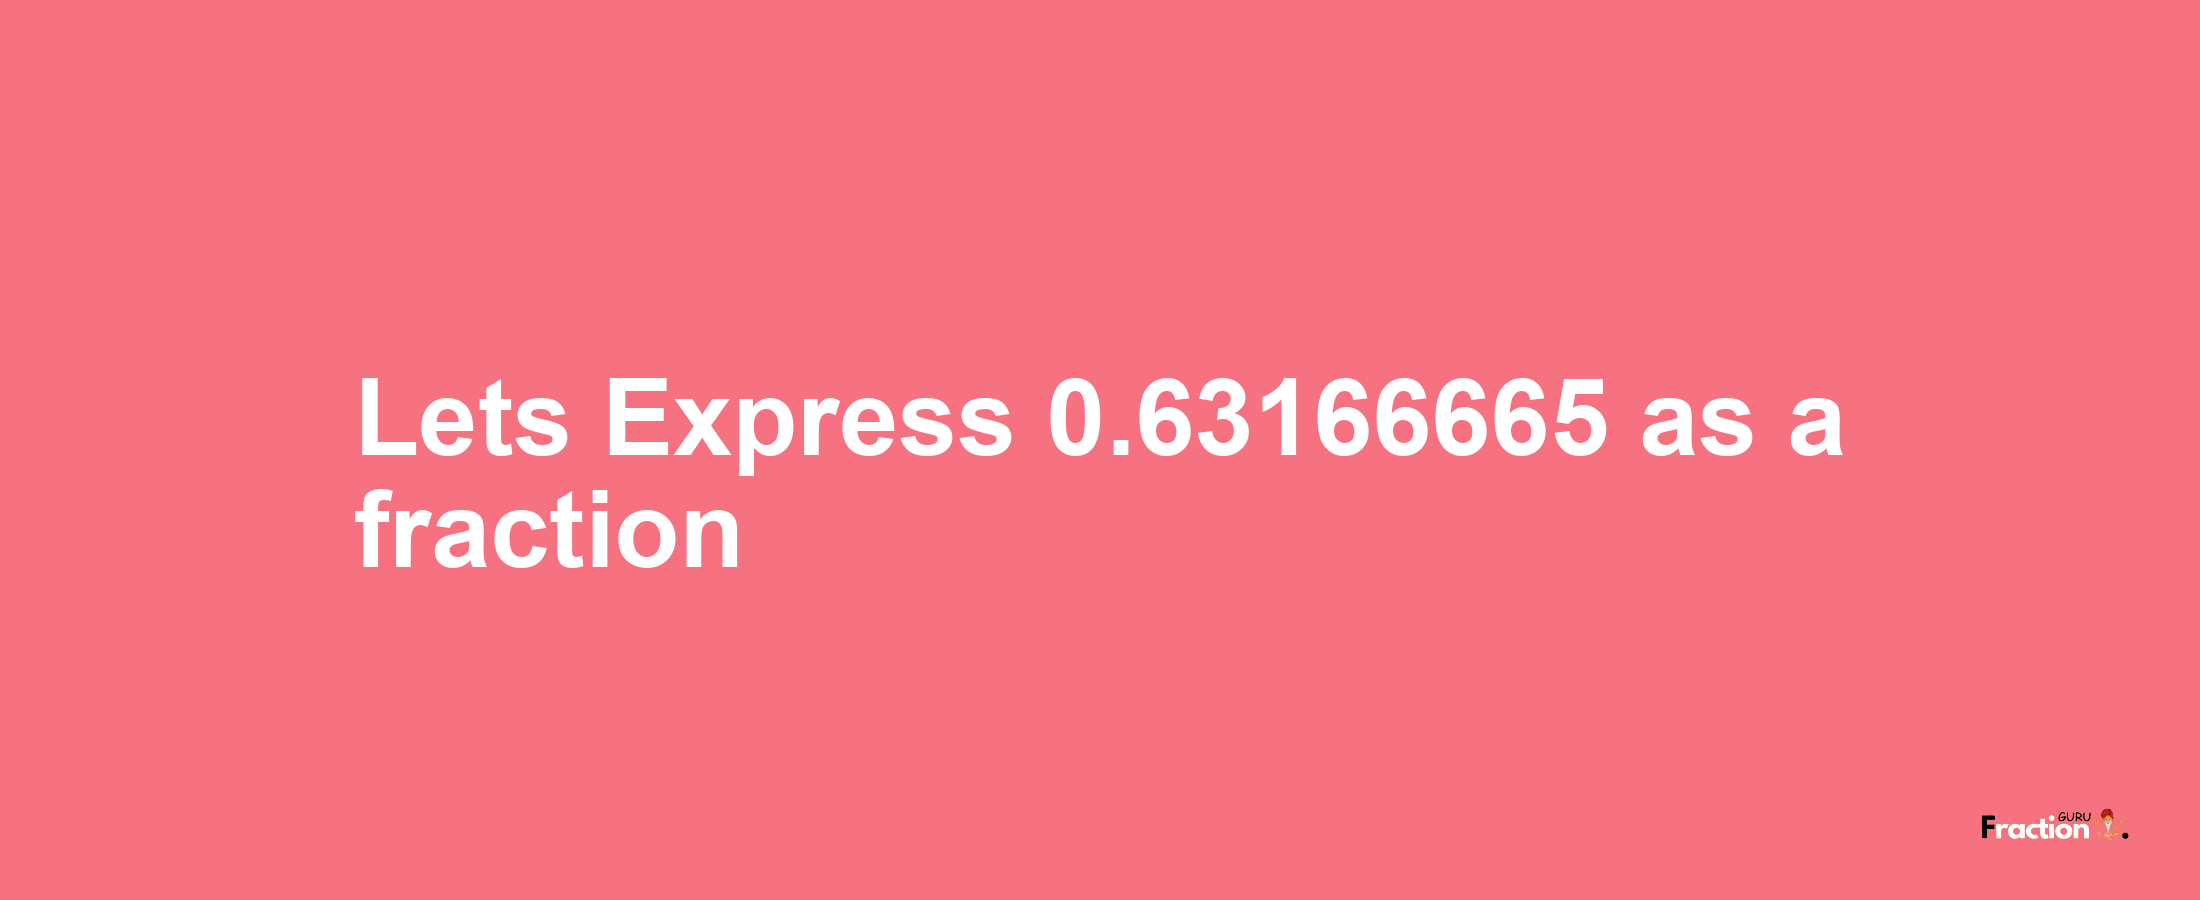 Lets Express 0.63166665 as afraction